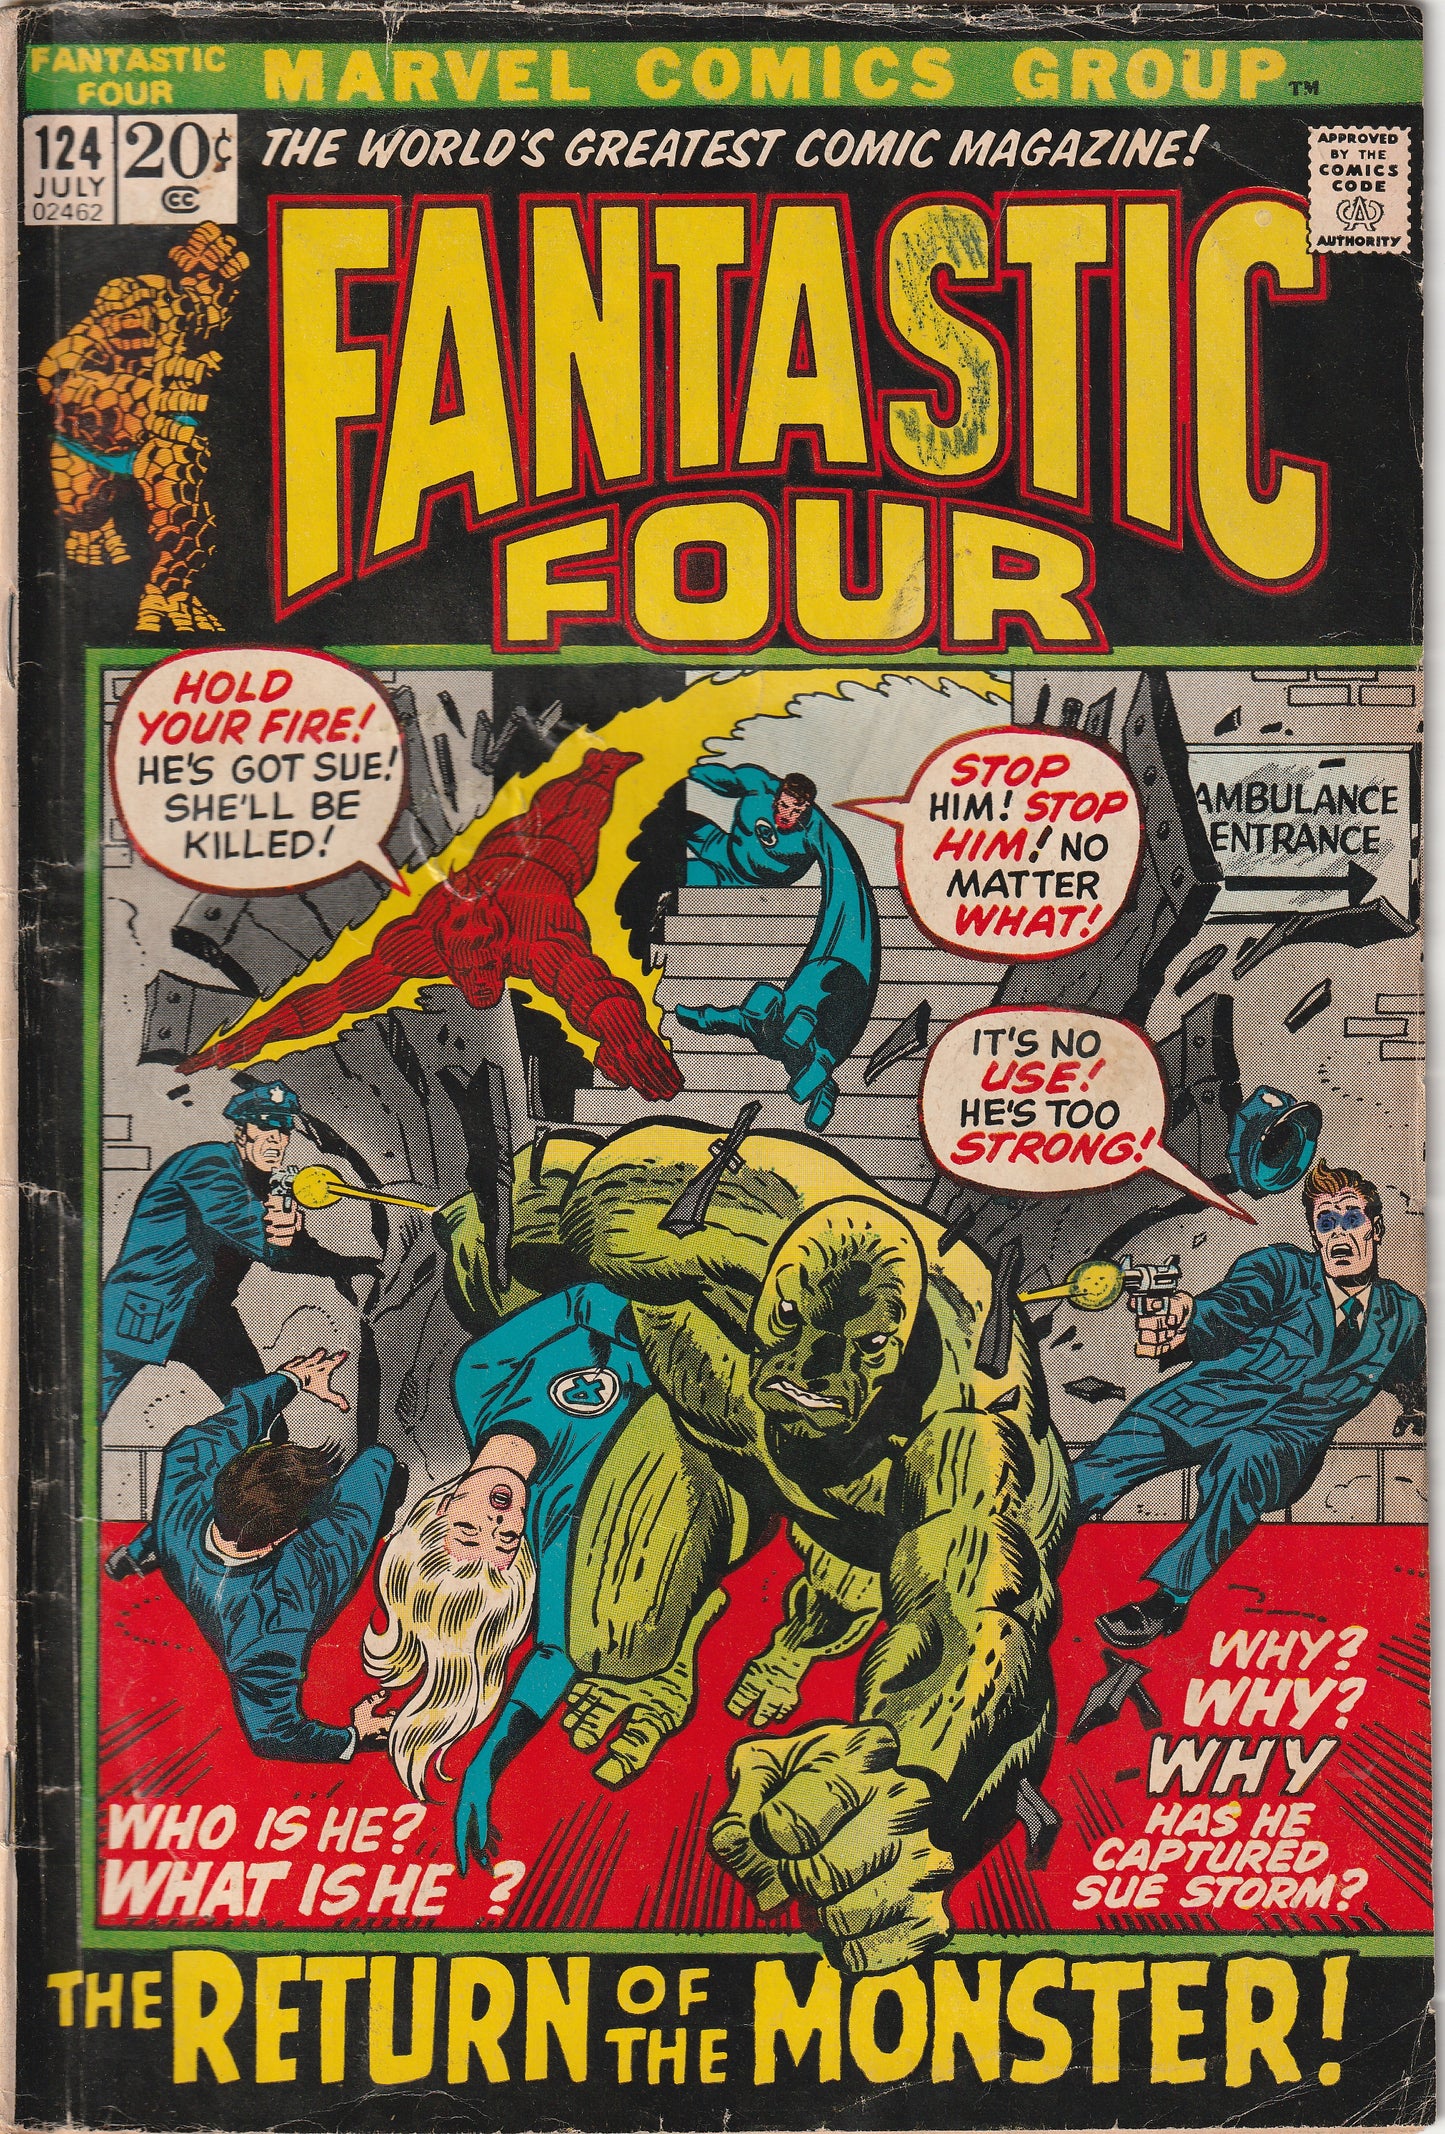 Fantastic Four #124 (1972) - Monster from the Lost Lagoon Appearance